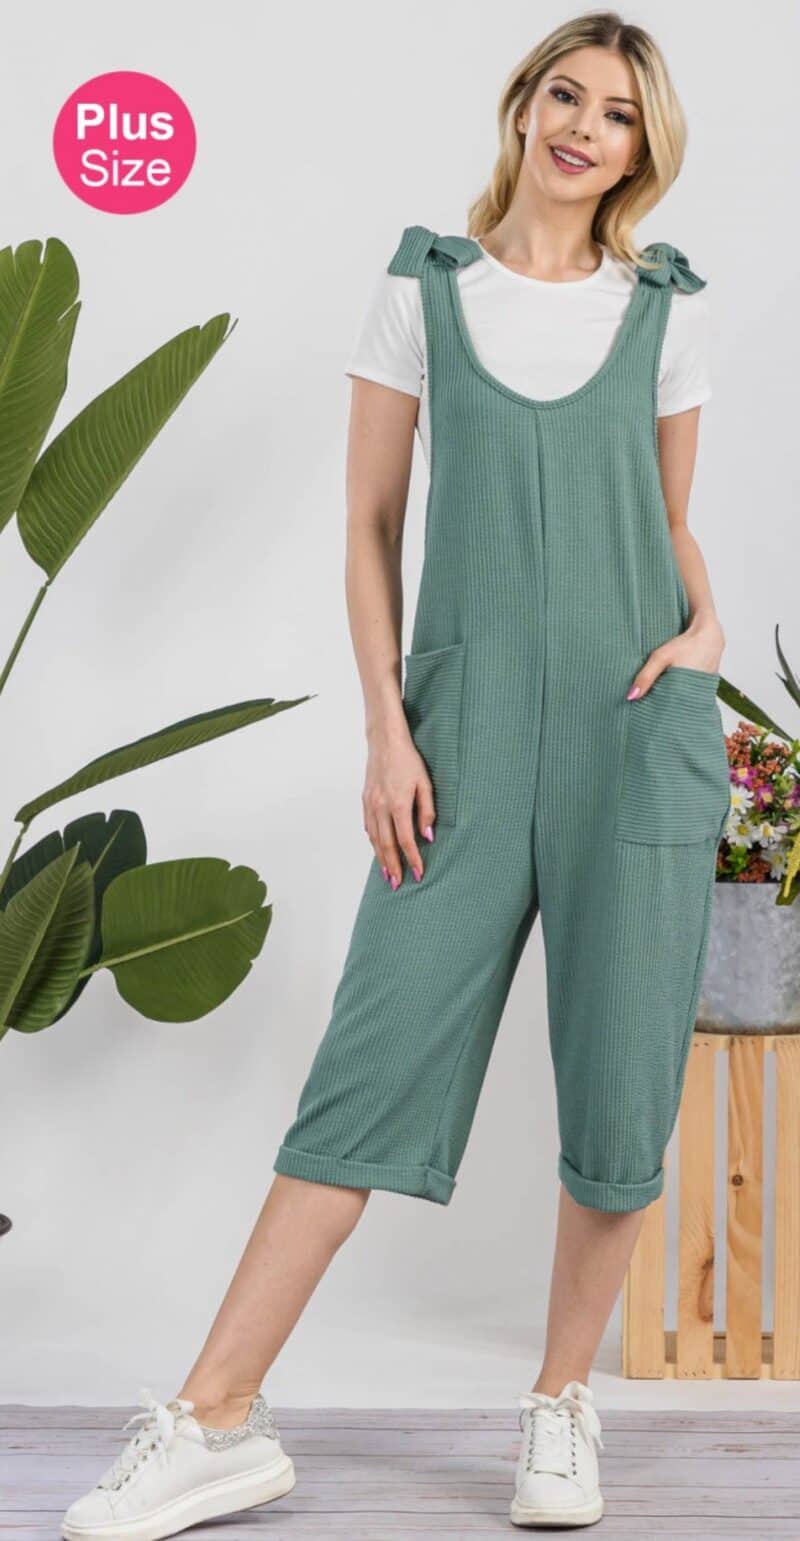 Woman posing in a green plus-size jumpsuit with white sneakers.